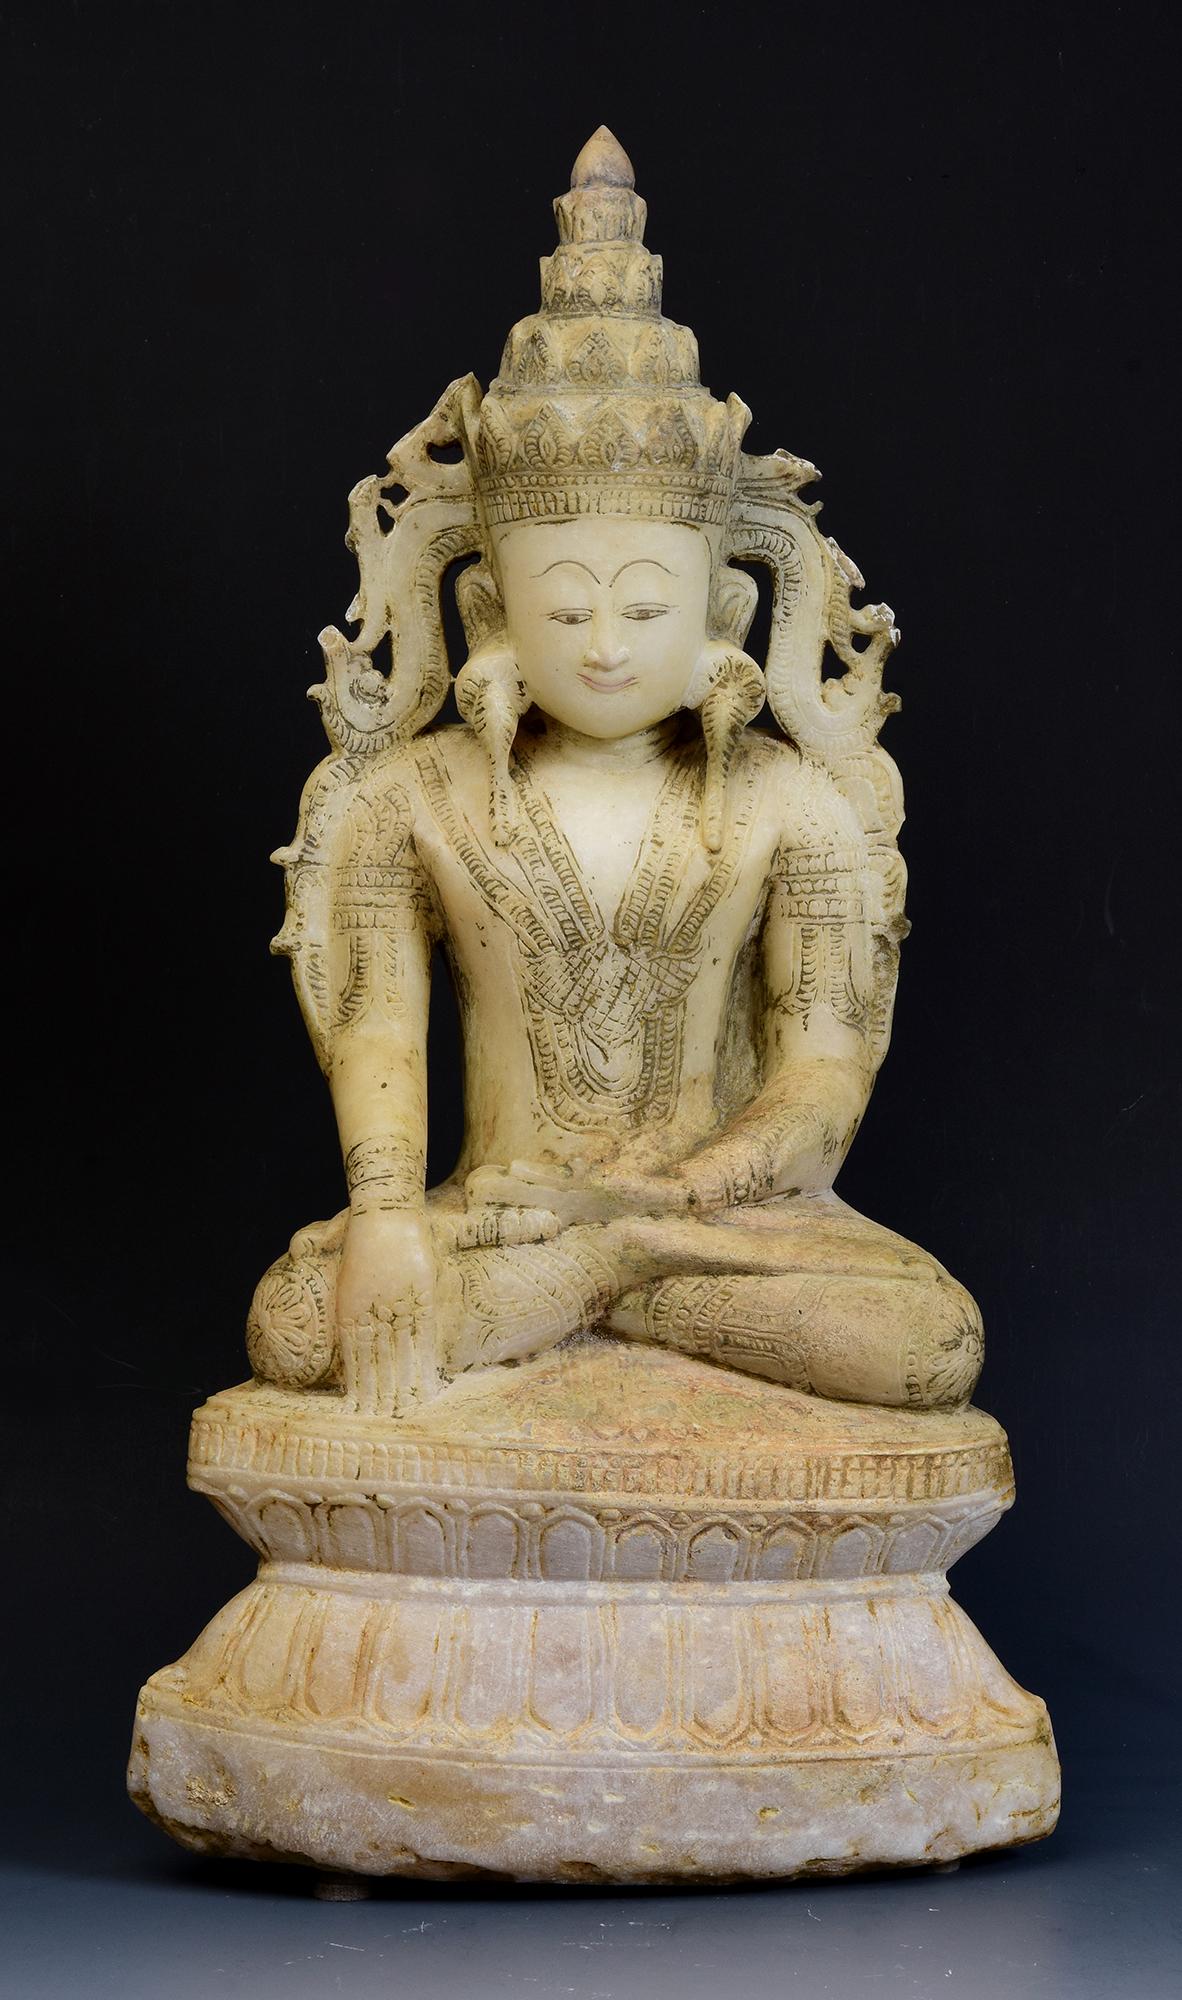 Rare antique Burmese alabaster seated crowned Buddha or sometimes known as 'King Buddha', wearing diadem-crowns and ornaments of king instead of ordinary monk's robes.

Age: Burma, Shan Period, 18th Century
Size: Height 46.5 C.M. / Width 25.1 C.M. /